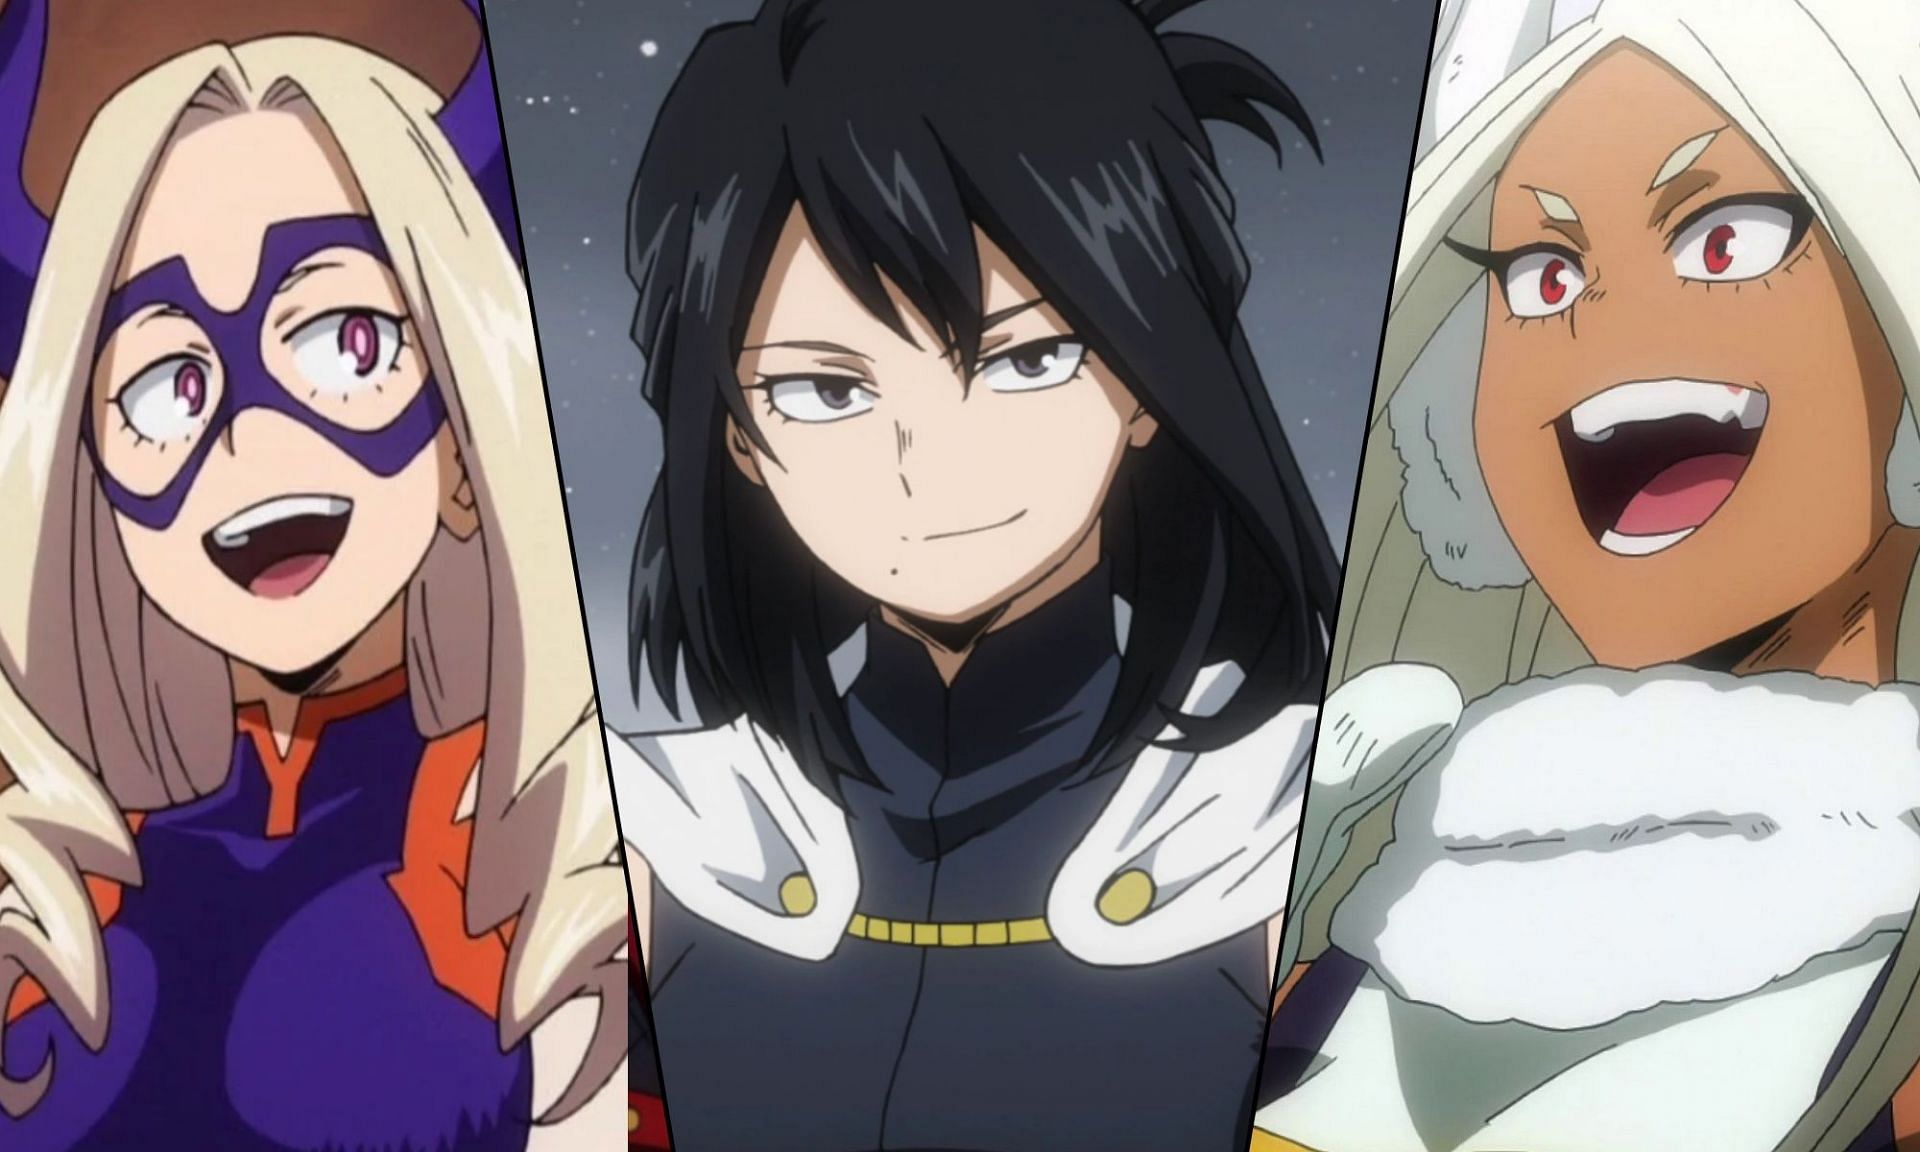 What are the best characters in My Hero Academia: The Strongest Hero?